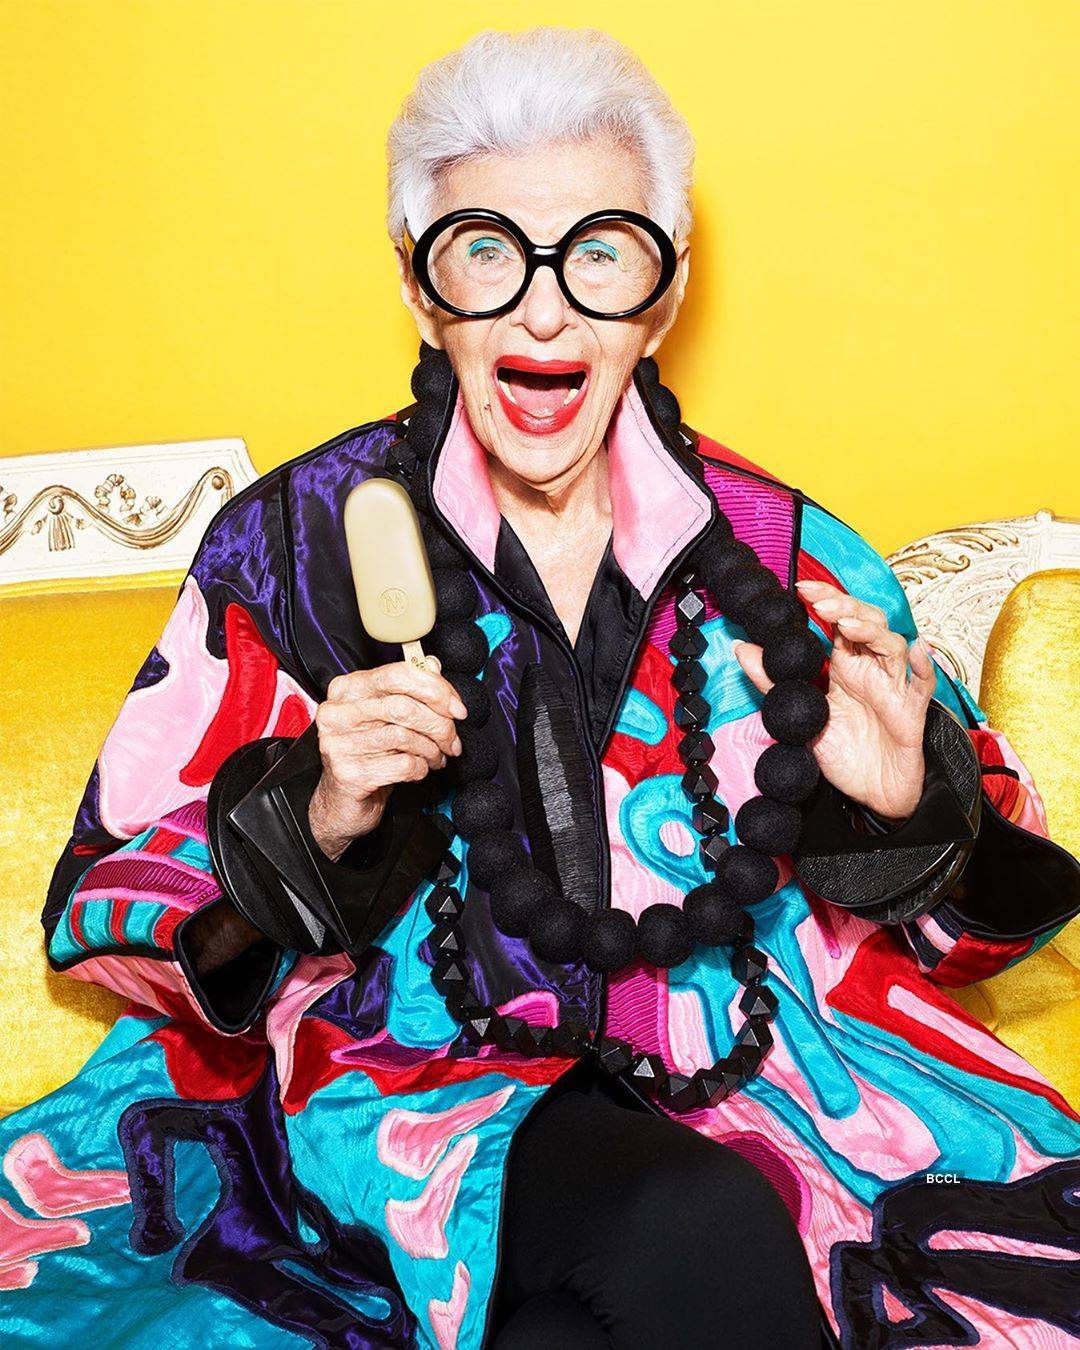 Know more about 97-year-old style icon Iris Apfel